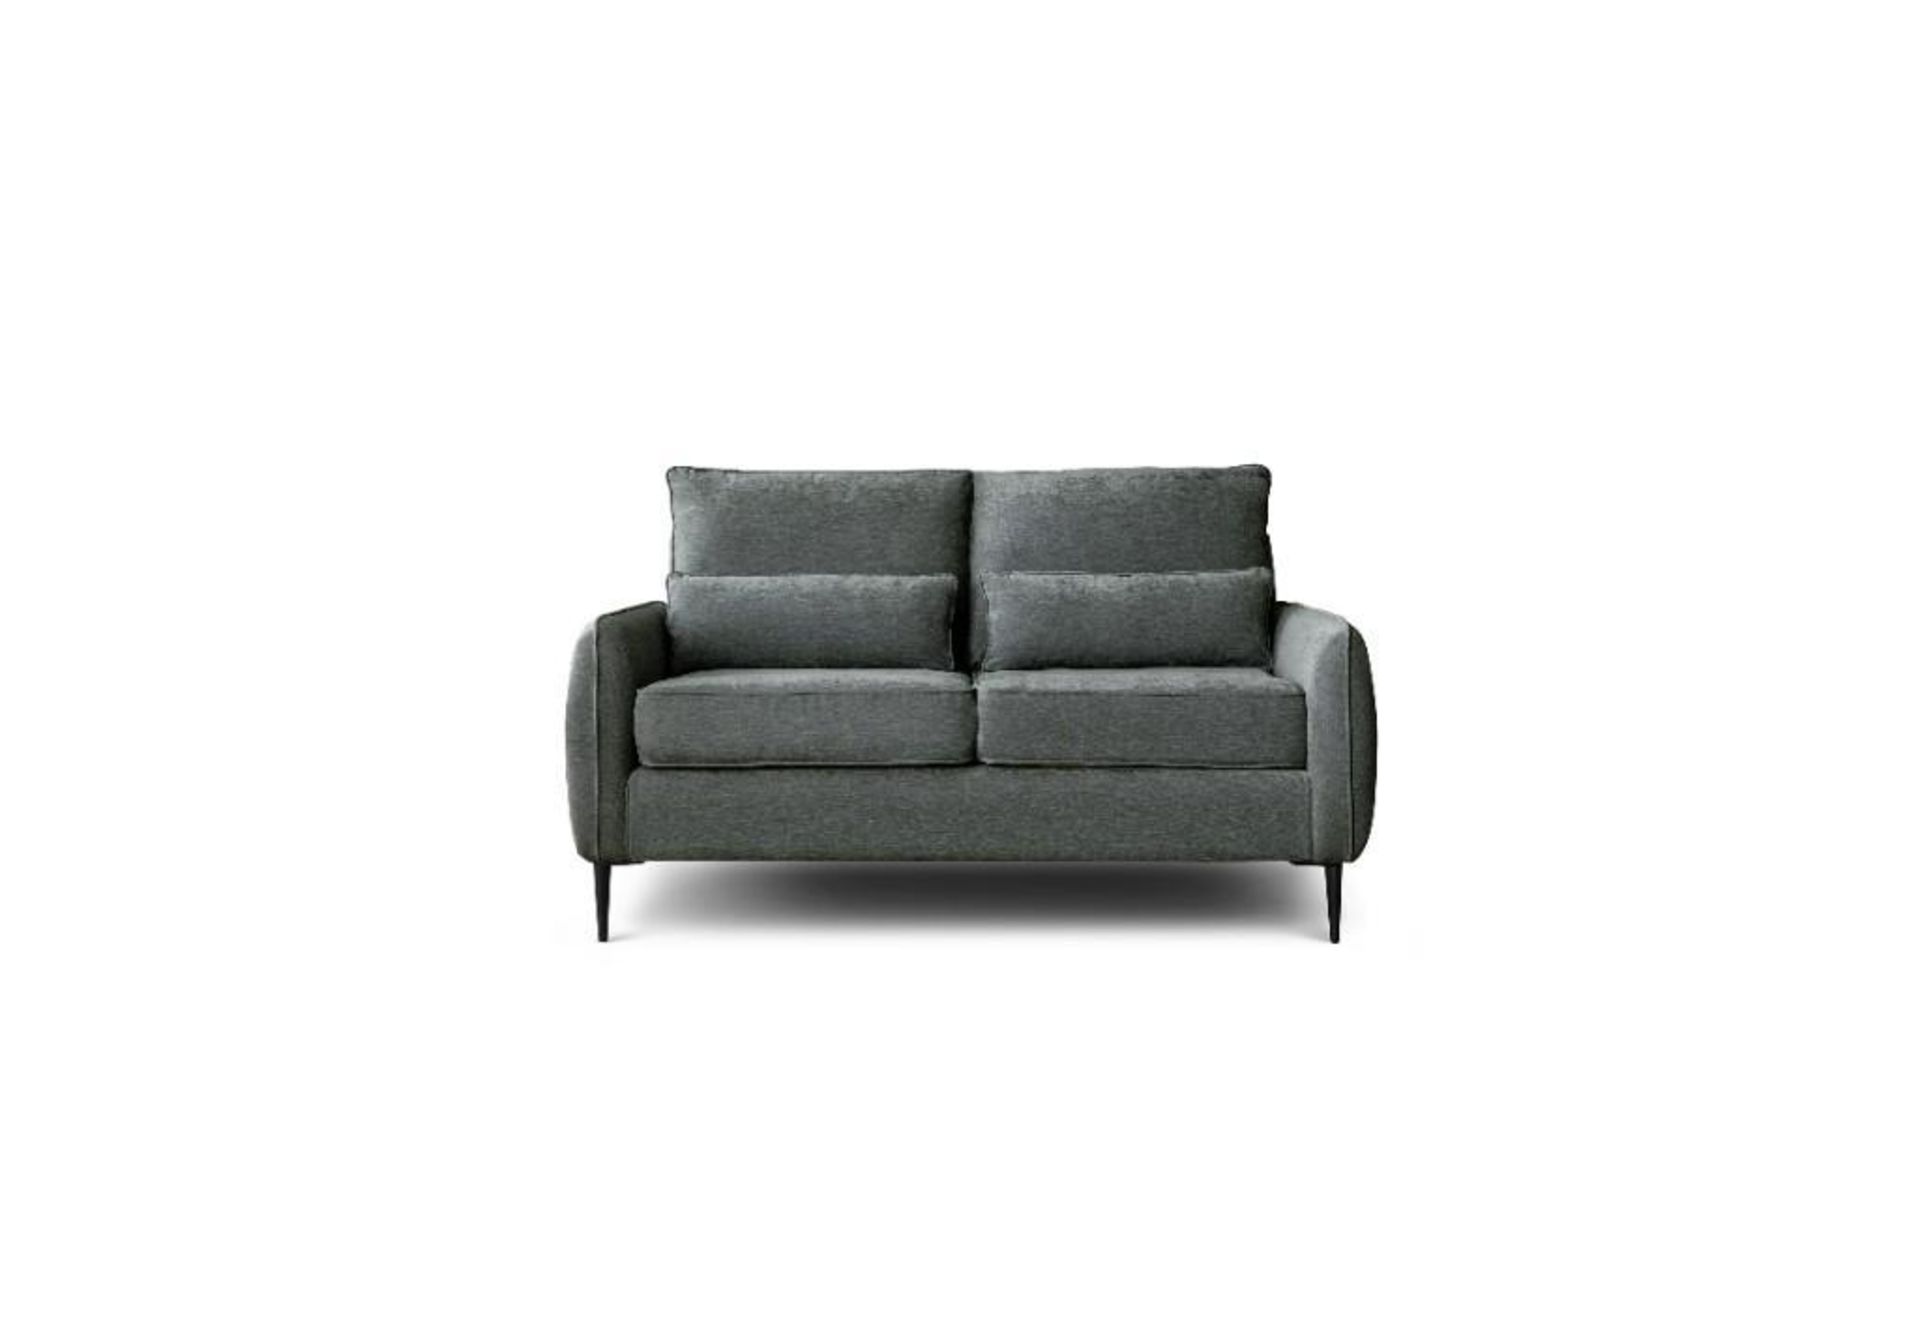 Brand new Boxed 2 Seater Rhonda Sofa in Charcoal - Image 3 of 3